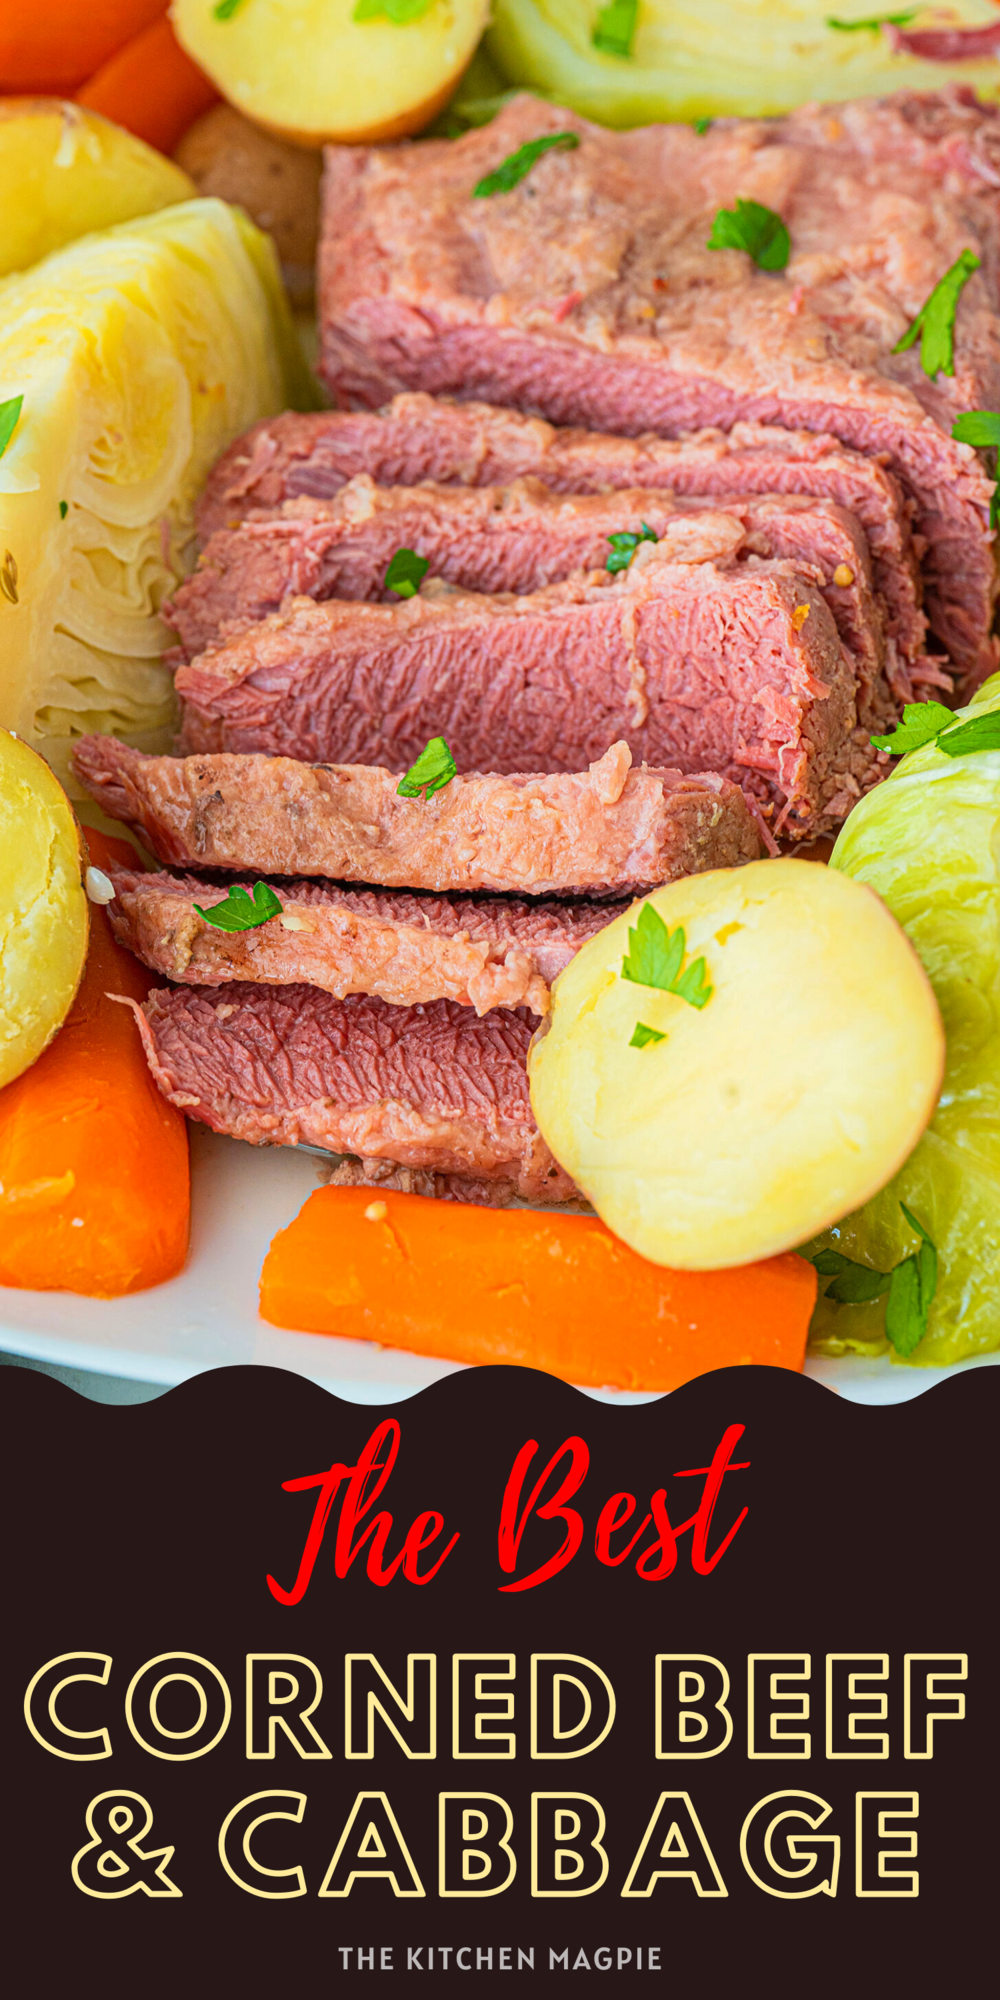 Corned beef and cabbage isn't just for St Patrick's day, it's also an incredibly comforting and wholesome dinner dish as well.